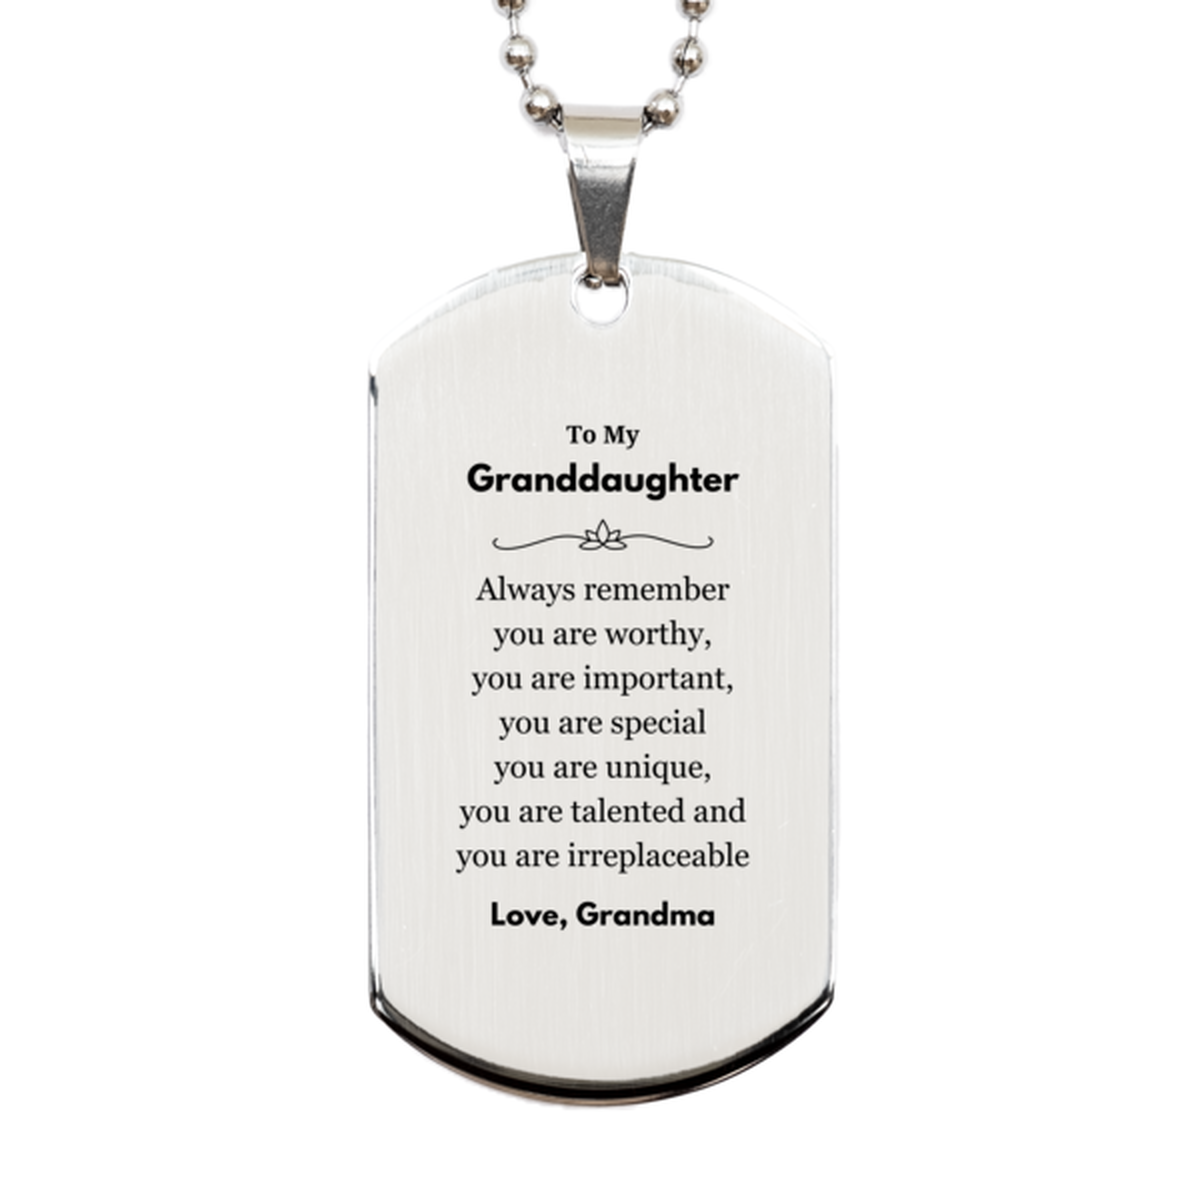 Granddaughter Birthday Gifts from Grandma, Inspirational Silver Dog Tag for Granddaughter Christmas Graduation Gifts for Granddaughter Always remember you are worthy, you are important. Love, Grandma